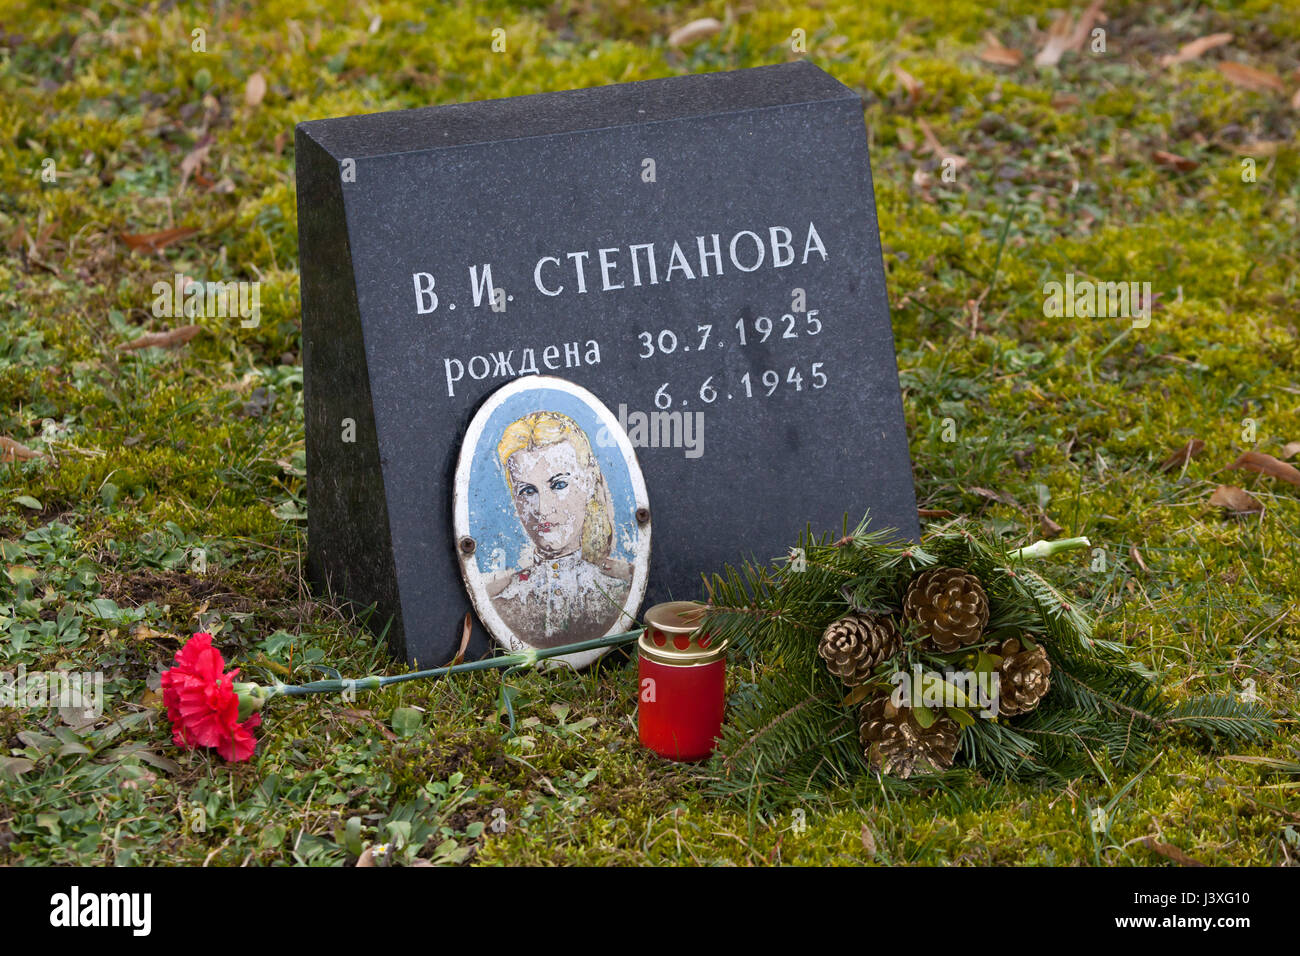 Photograph of Soviet civilian Vera Stepanova on the ground of the Soviet War Memorial at the Central Cemetery in Brno, Czech Republic, pictured on February 9, 2016 after an unsuccessful amateurish restoration. Vera Stepanova was born on July 30, 1925 in Kuznetsk in Penza Region, Russia, served in the Red Army as a typist during World War II and died of typhus at age 19 on June 6, 1945, in Brno in South Moravia, Czechoslovakia. Her photograph installed by the relatives after the war on the mass grave where her body rests was unsuccessfully restored recently by unknown amateurs. Stock Photo